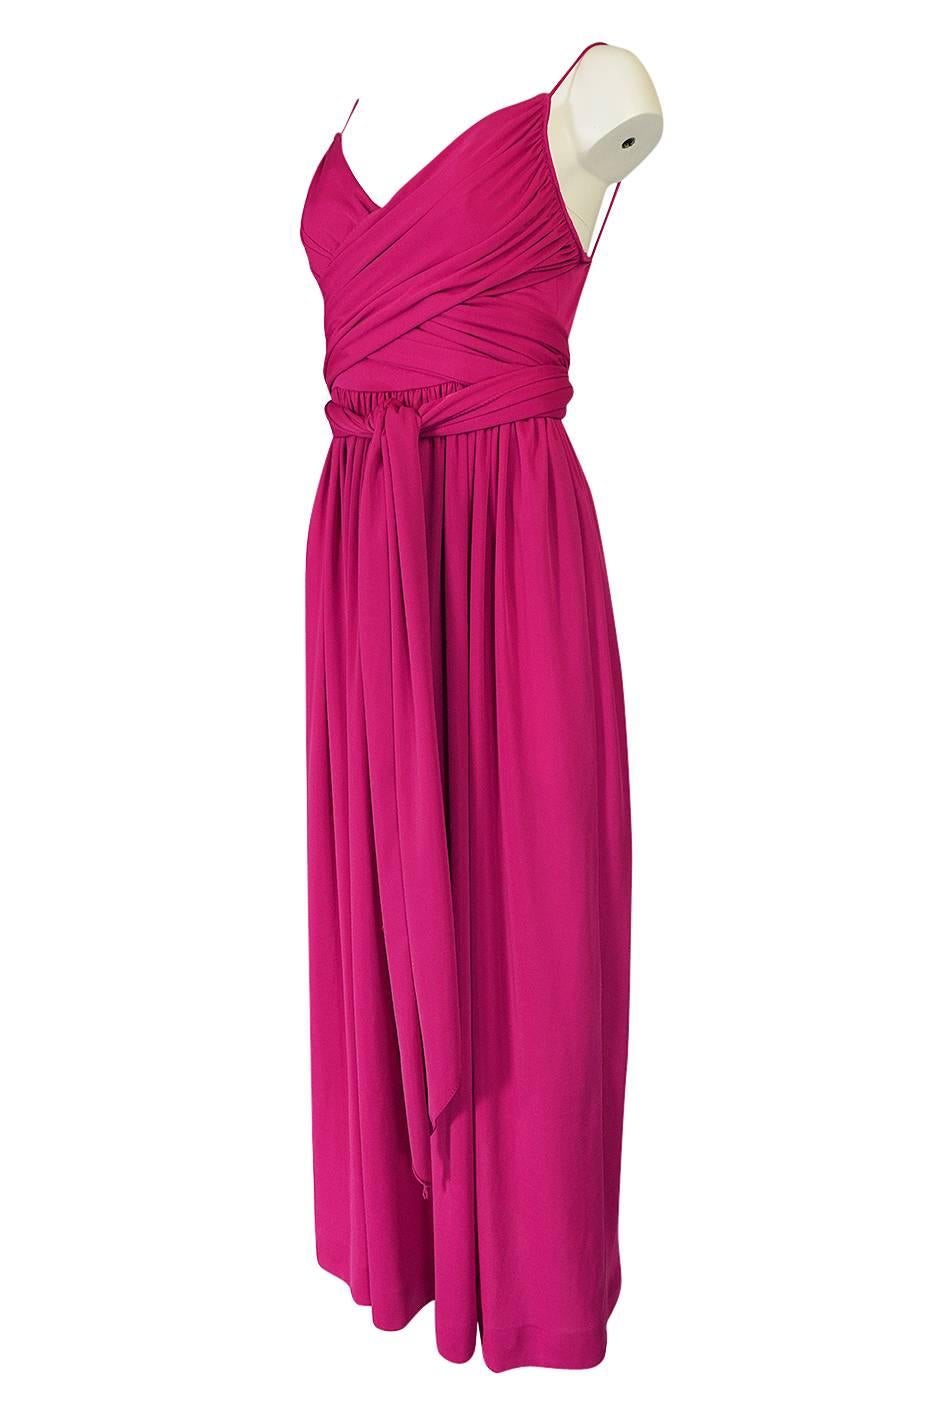 Women's 1970s Marita by Anthony Muto Pink Wrapped Jersey Halter Dress